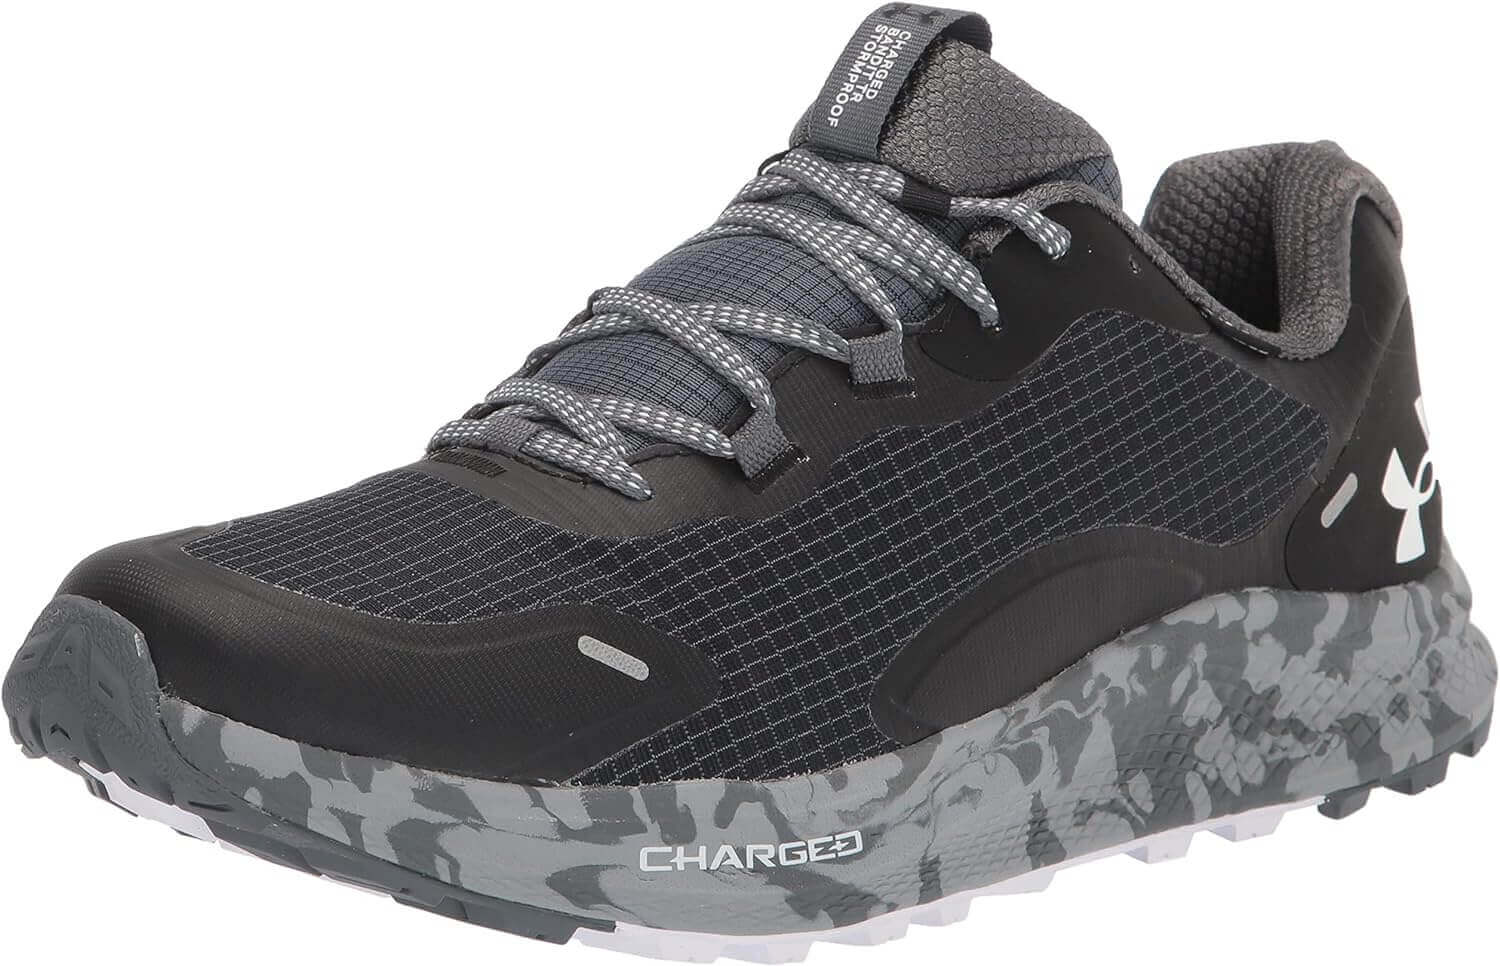 Shop The Latest >Under Armour Men’s Charged Bandit Trail 2 > *Only $98.88*> From The Top Brand > *Under Armourl* > Shop Now and Get Free Shipping On Orders Over $45.00 >*Shop Earth Foot*